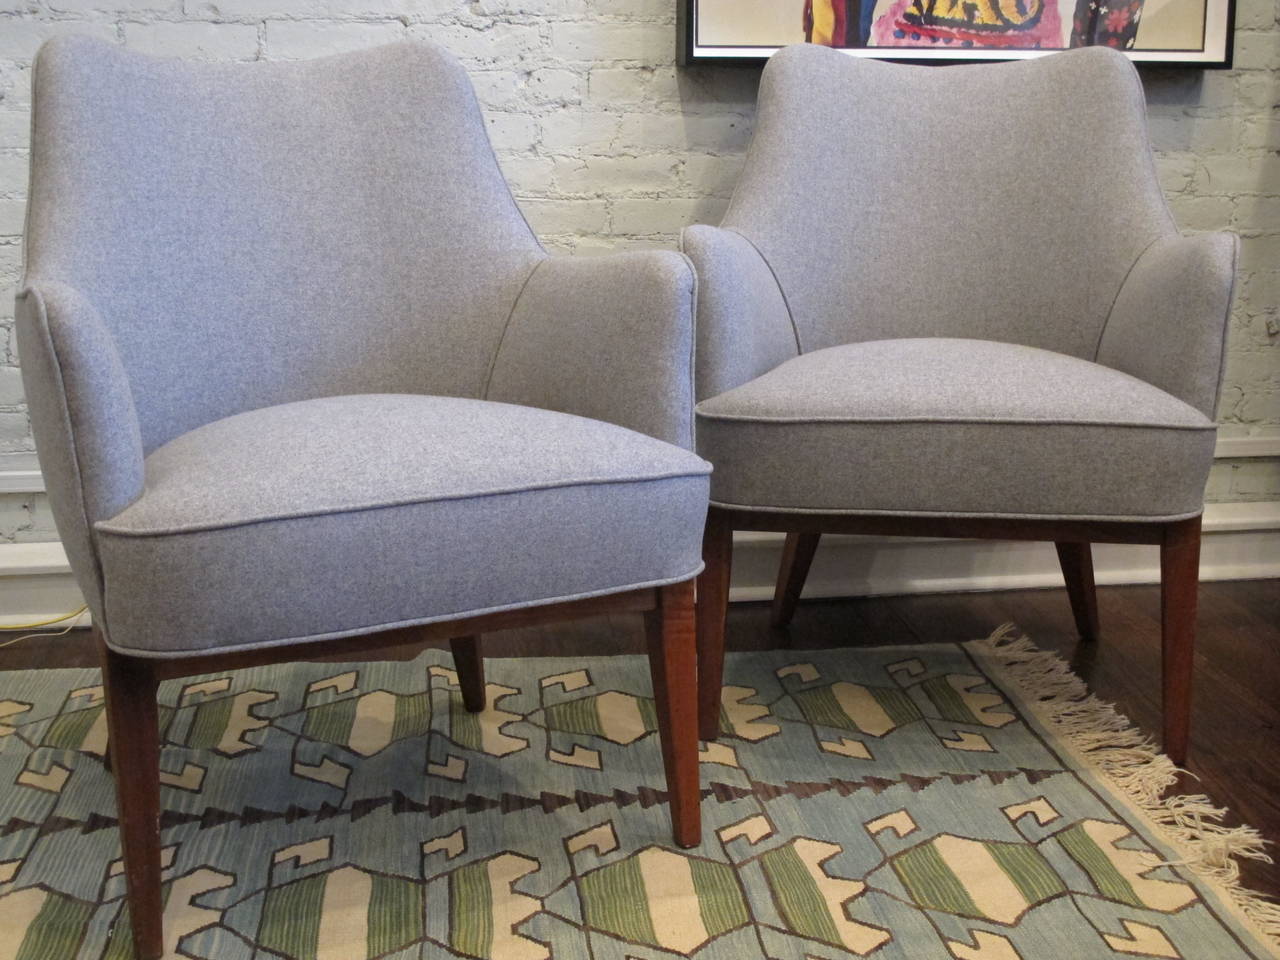 Pair of Danish chairs on teak bases with tapered legs, newly recovered in gray wool flannel. Would work as well as lounge chairs or at a desk. Arm height is 26